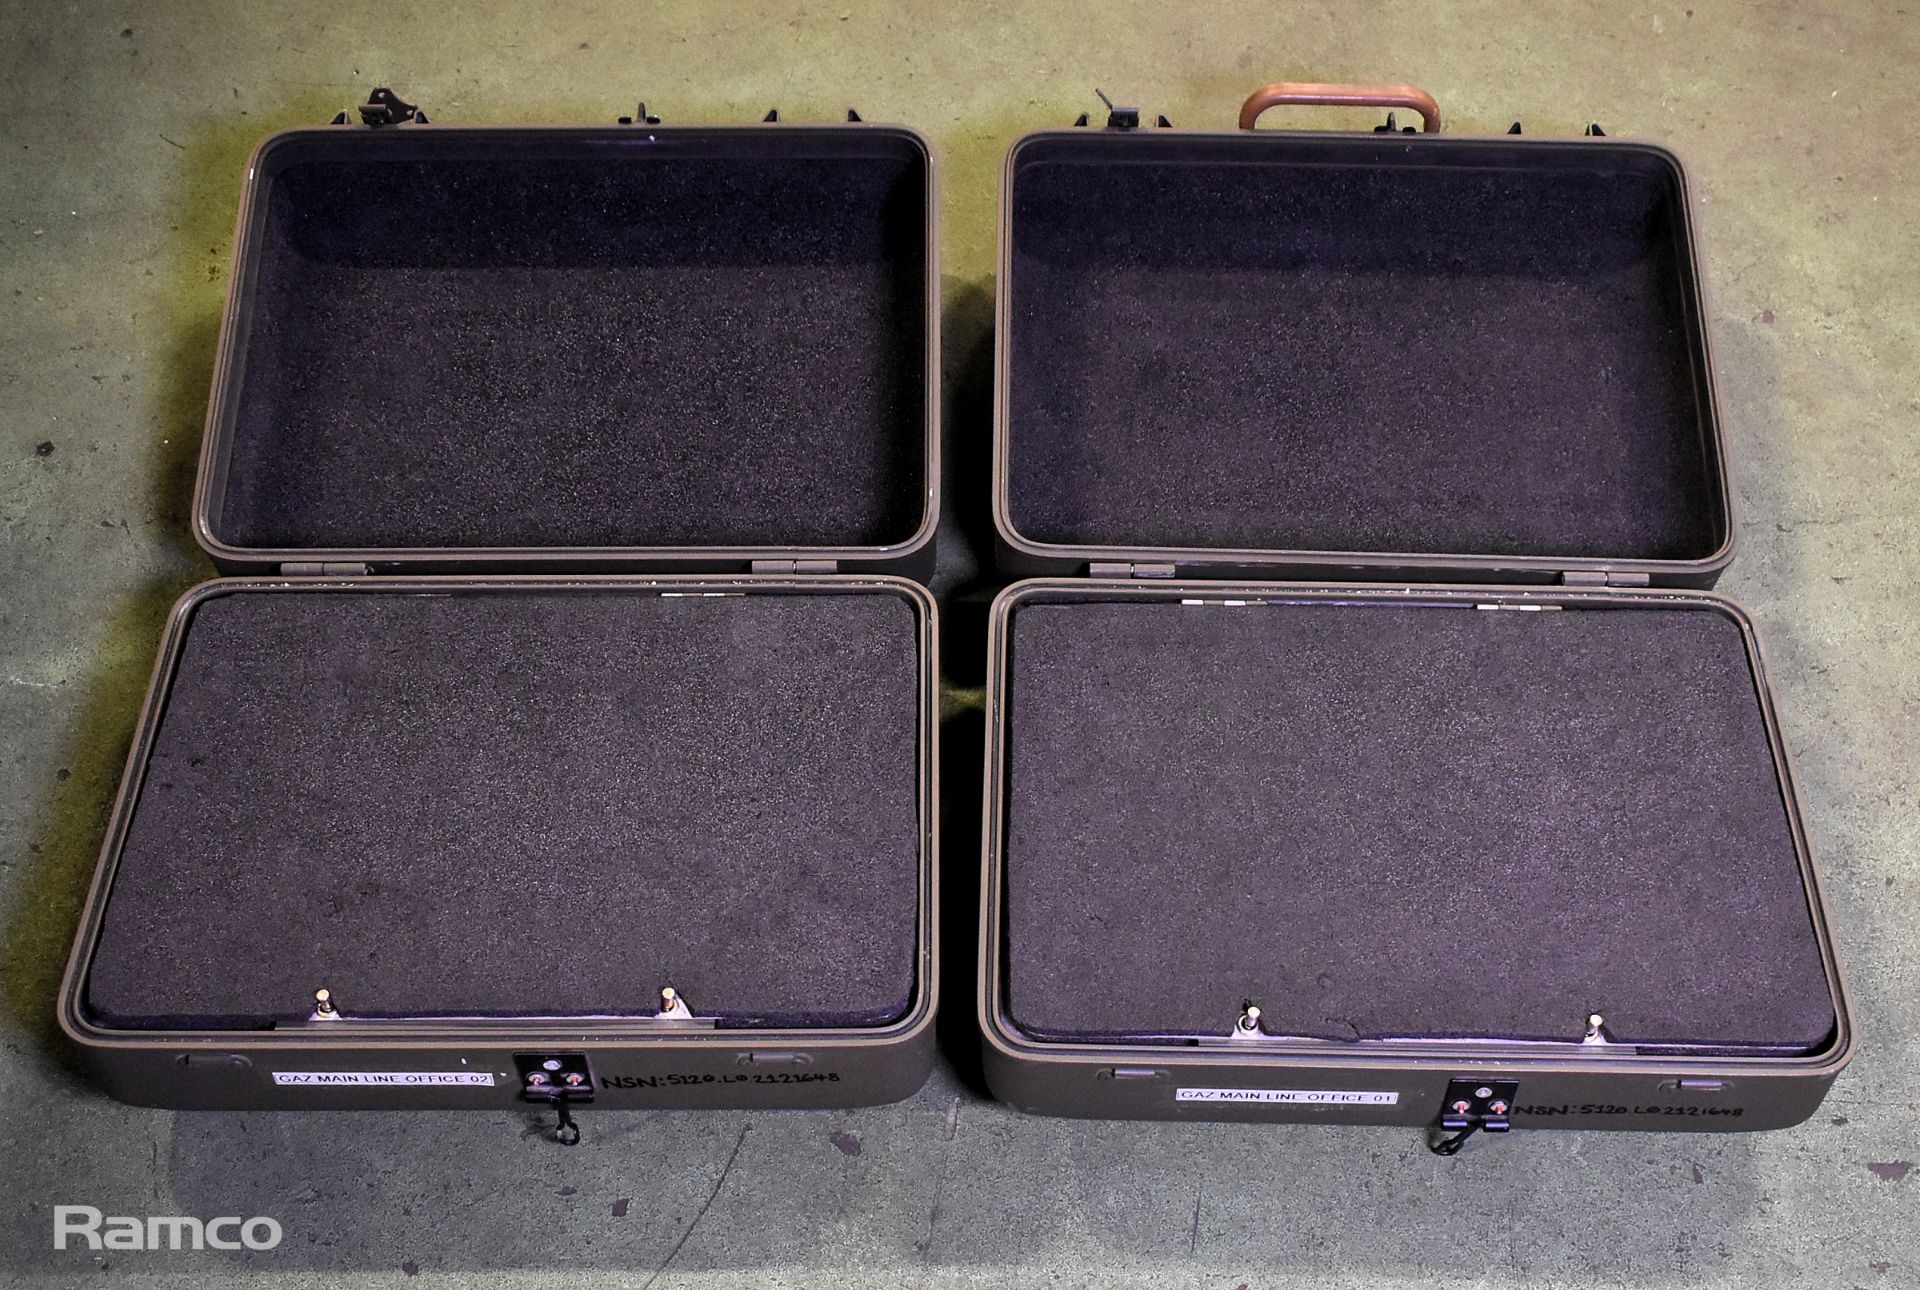 2x Transport and storage cases with divider panel - L 460 x W 370 x H 190mm - Image 2 of 6